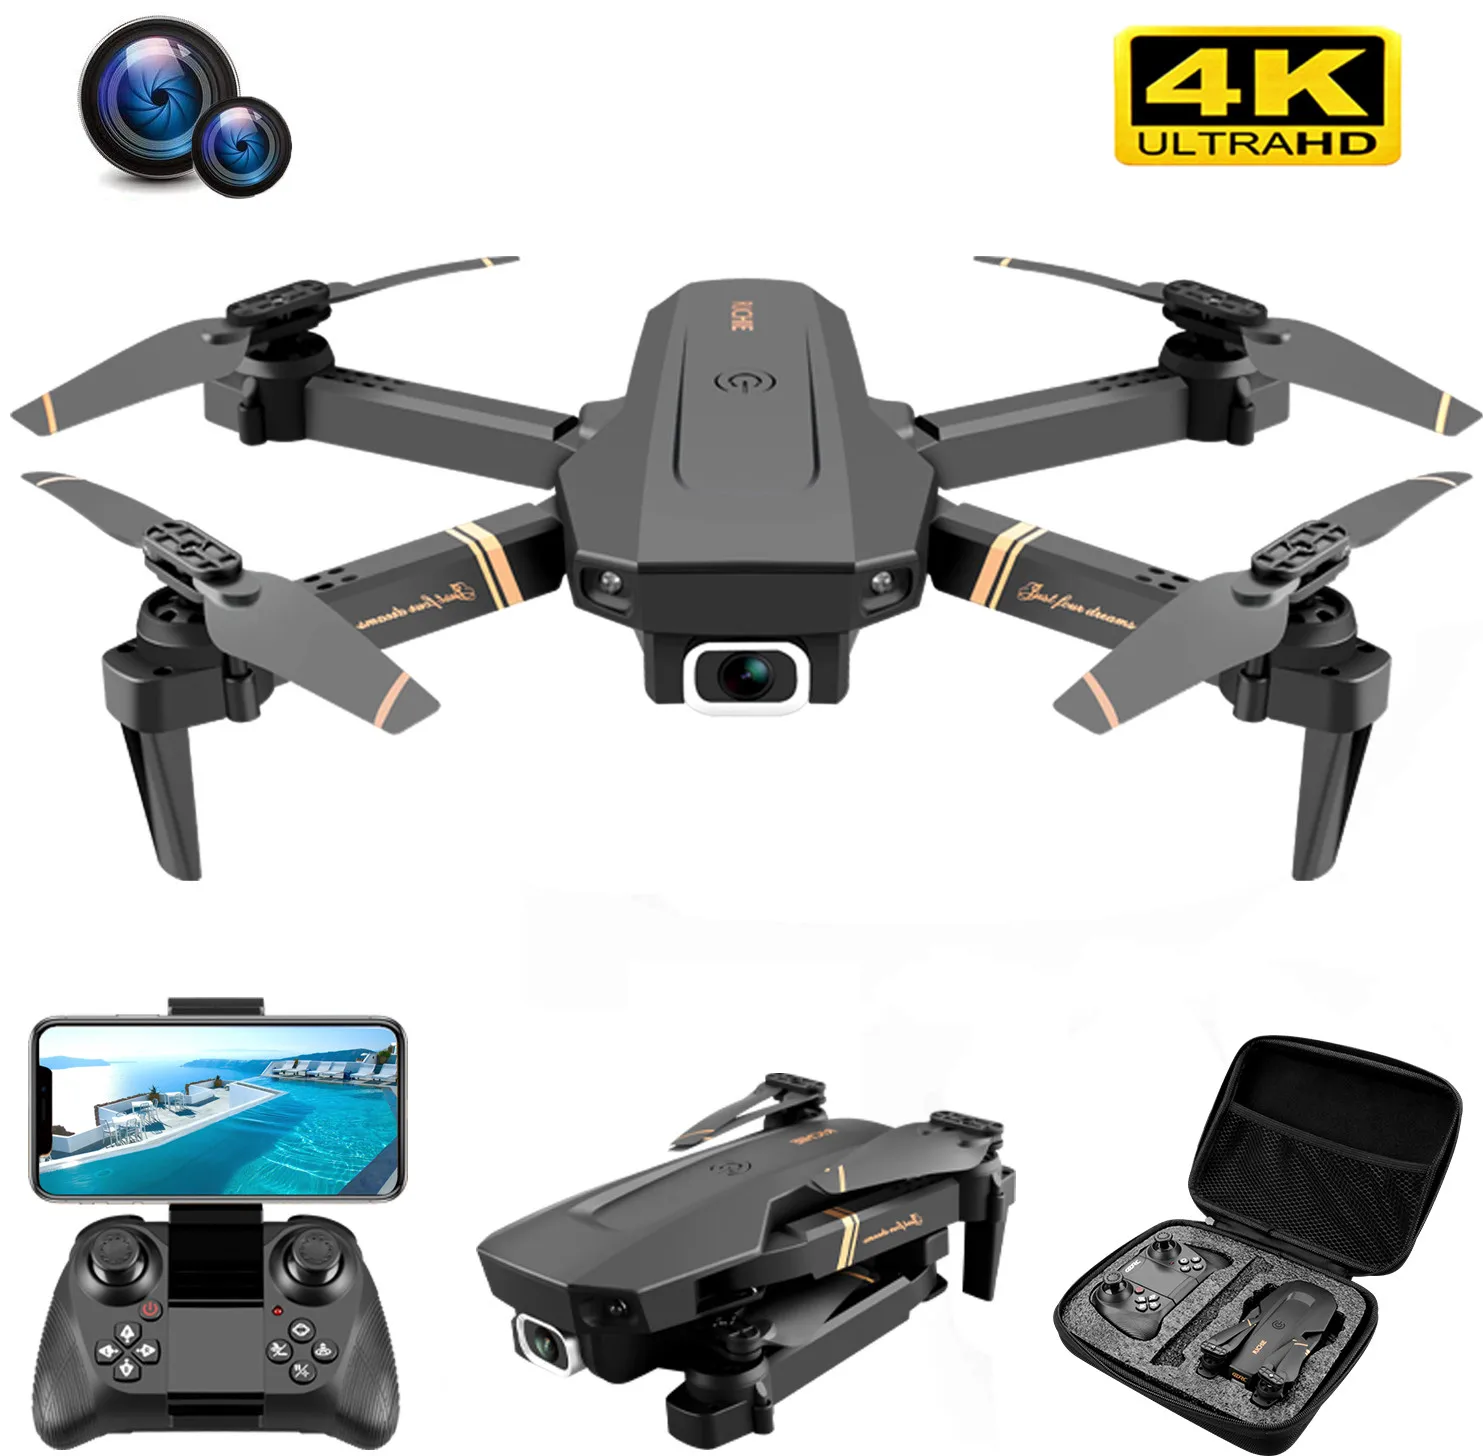 aliexpress - V4 Rc Drone 4k HD Wide Angle Camera 1080P WiFi fpv Drone Dual Camera Quadcopter Real-time transmission Helicopter Toys